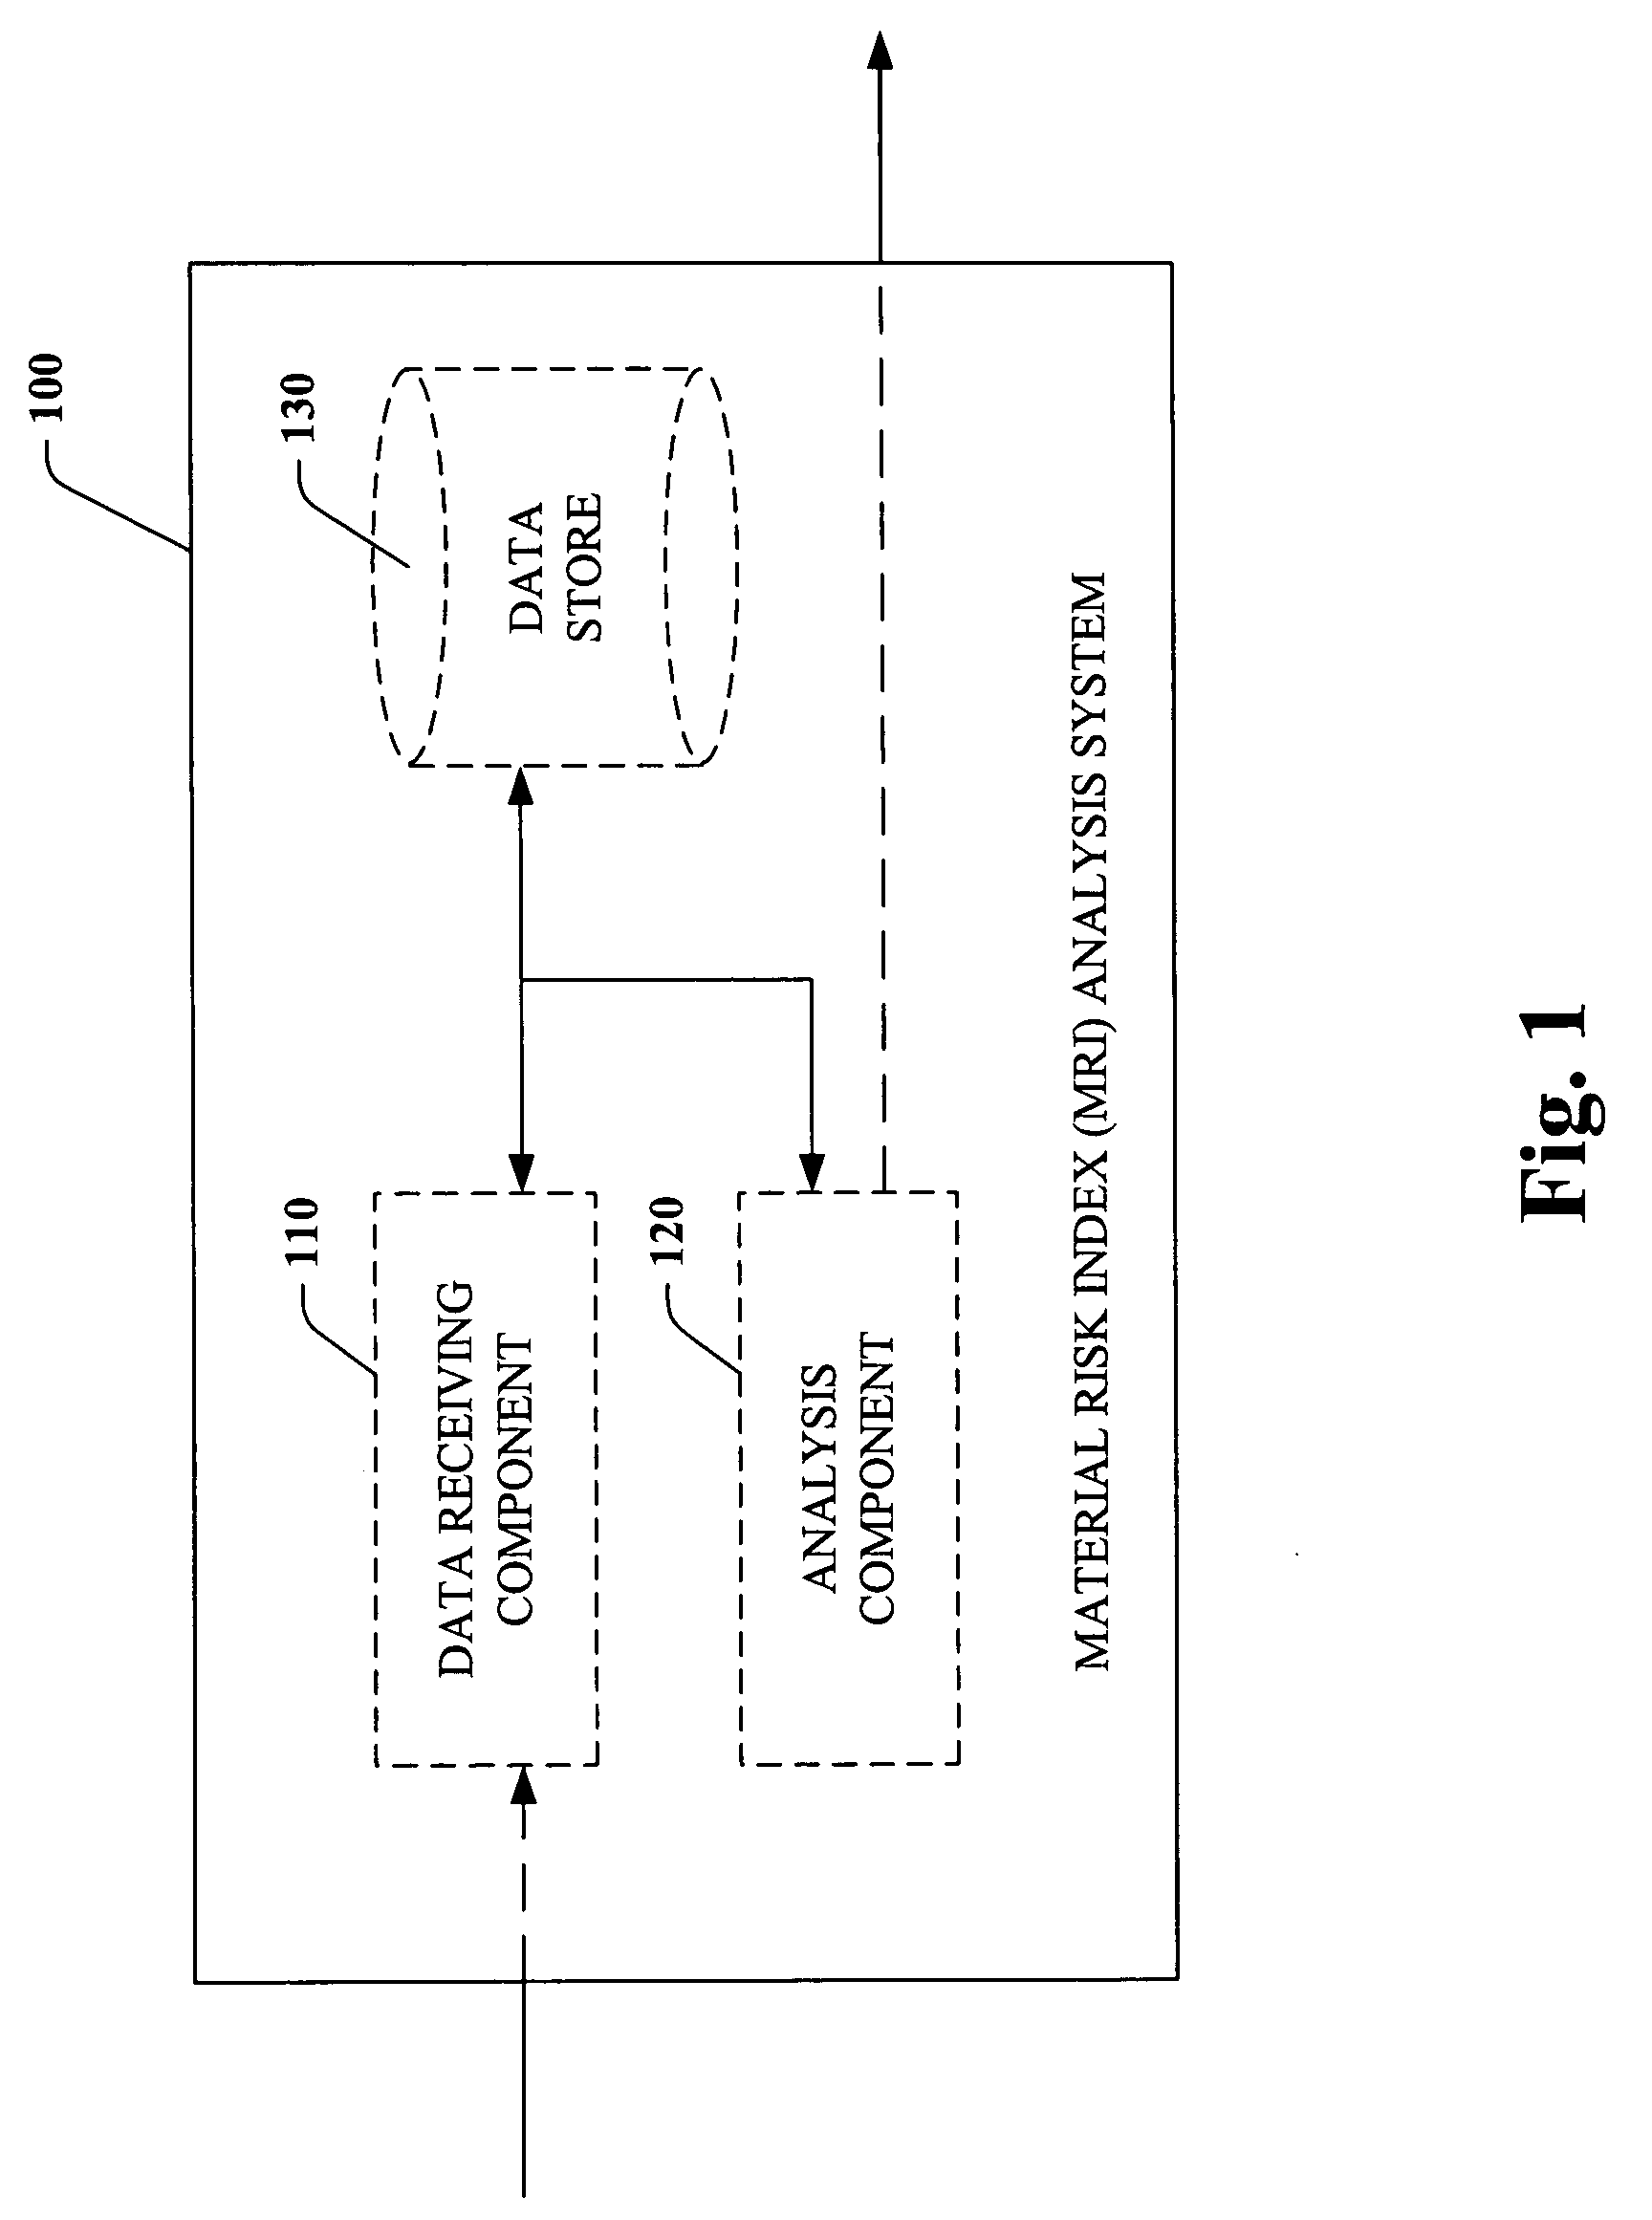 Systems and methods for automatically determining and/or inferring component end of life (EOL)